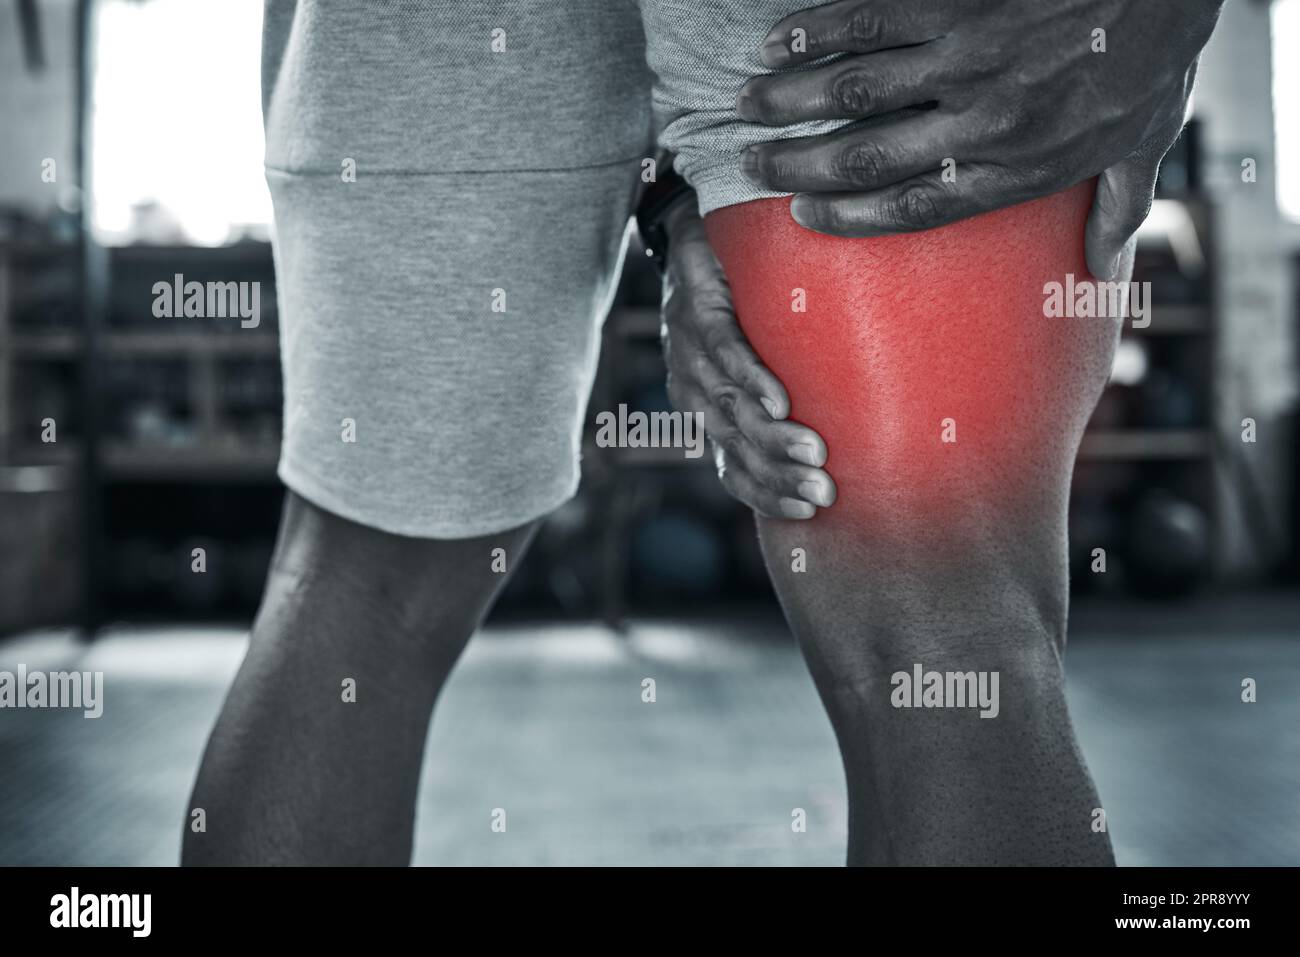 The back of the thigh always hurts. hands of a bodybuilder holding his hurt leg. Leg cramps can hit any athlete. Being fit needs strength. Physical pain from injury can be prevented when exercising. Stock Photo